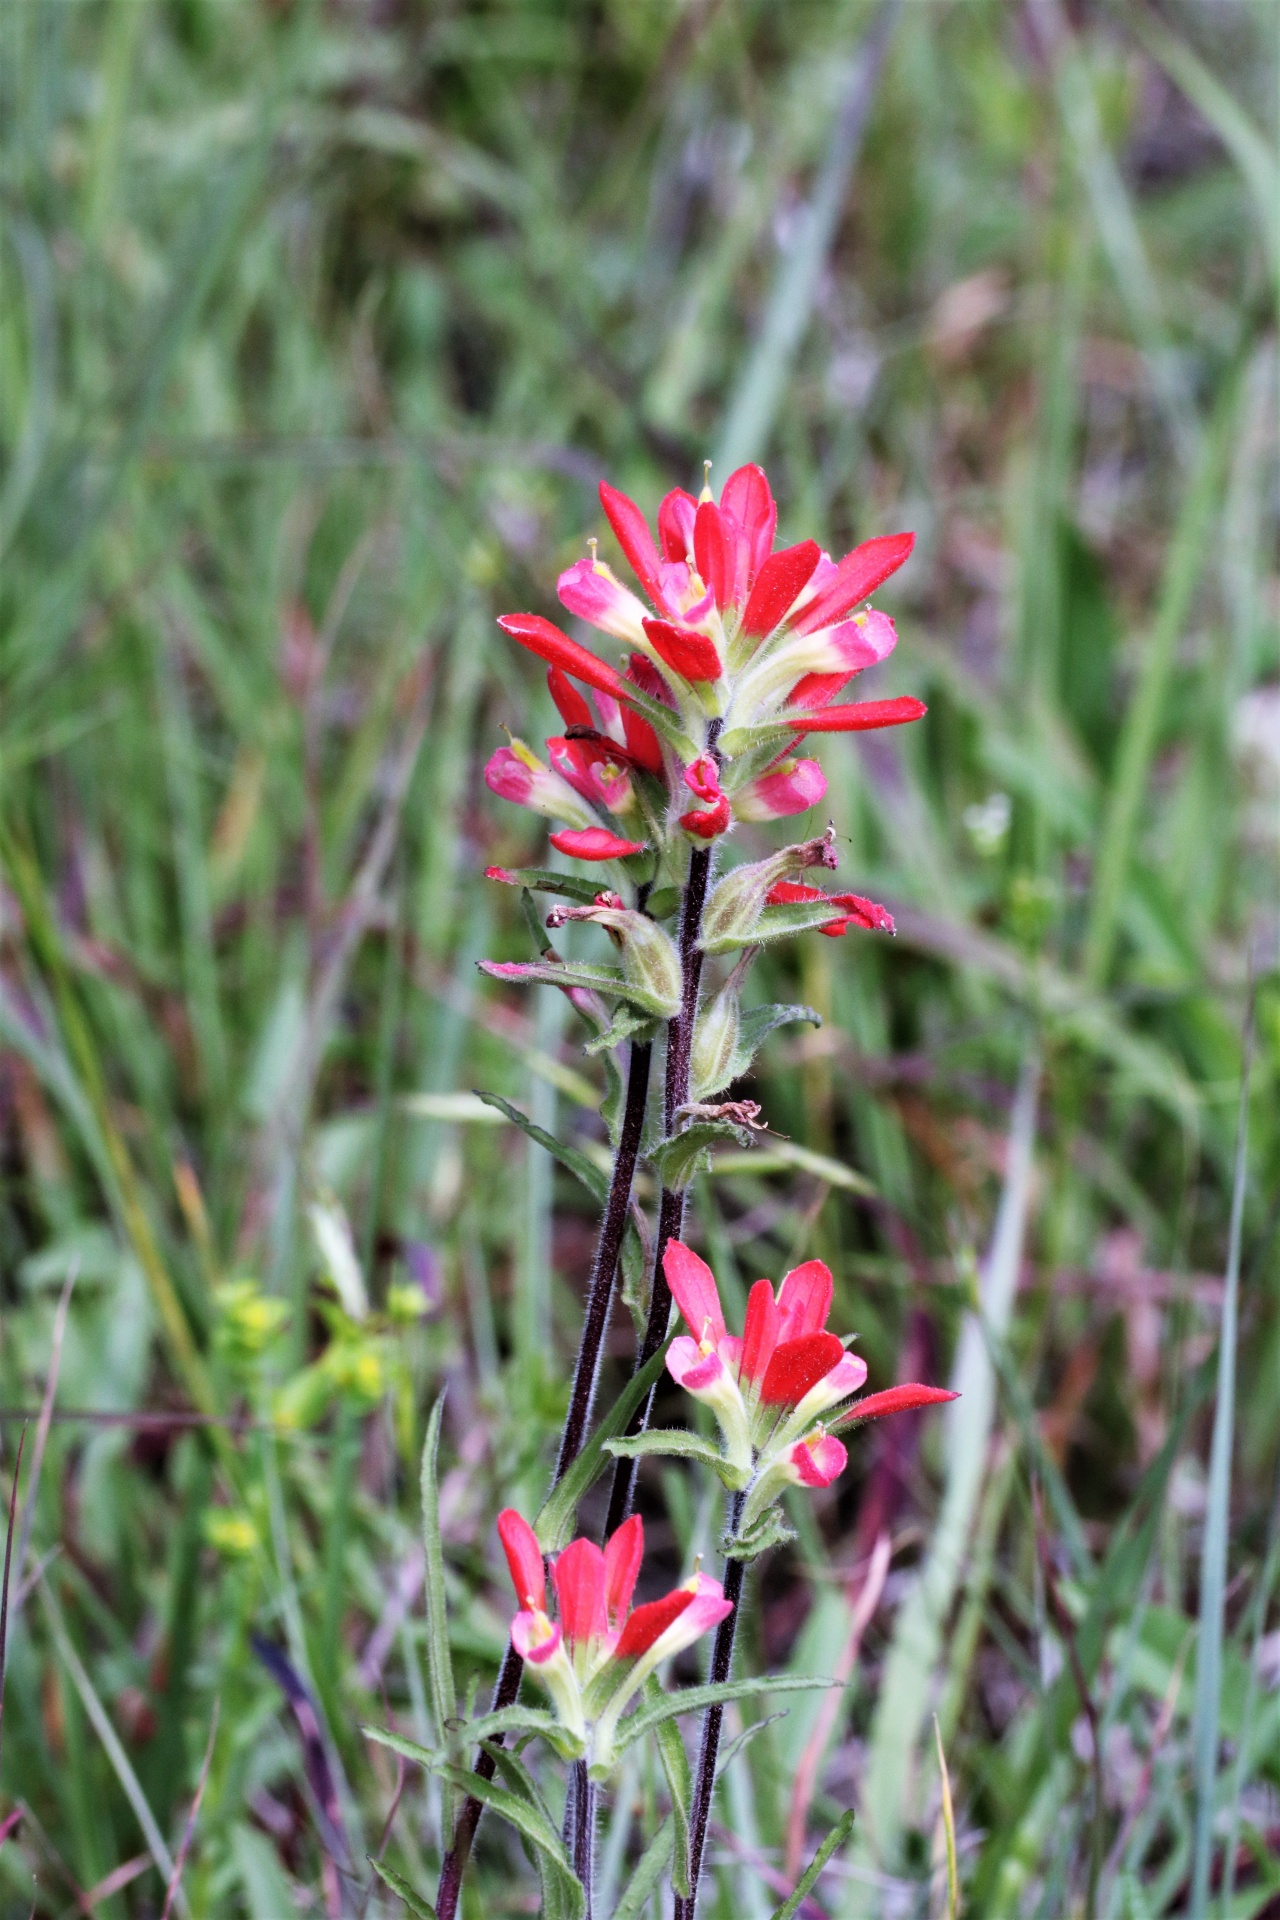 Several red Indian paintbrush wildflowers grow among tall green grass in an Oklahoma country field.